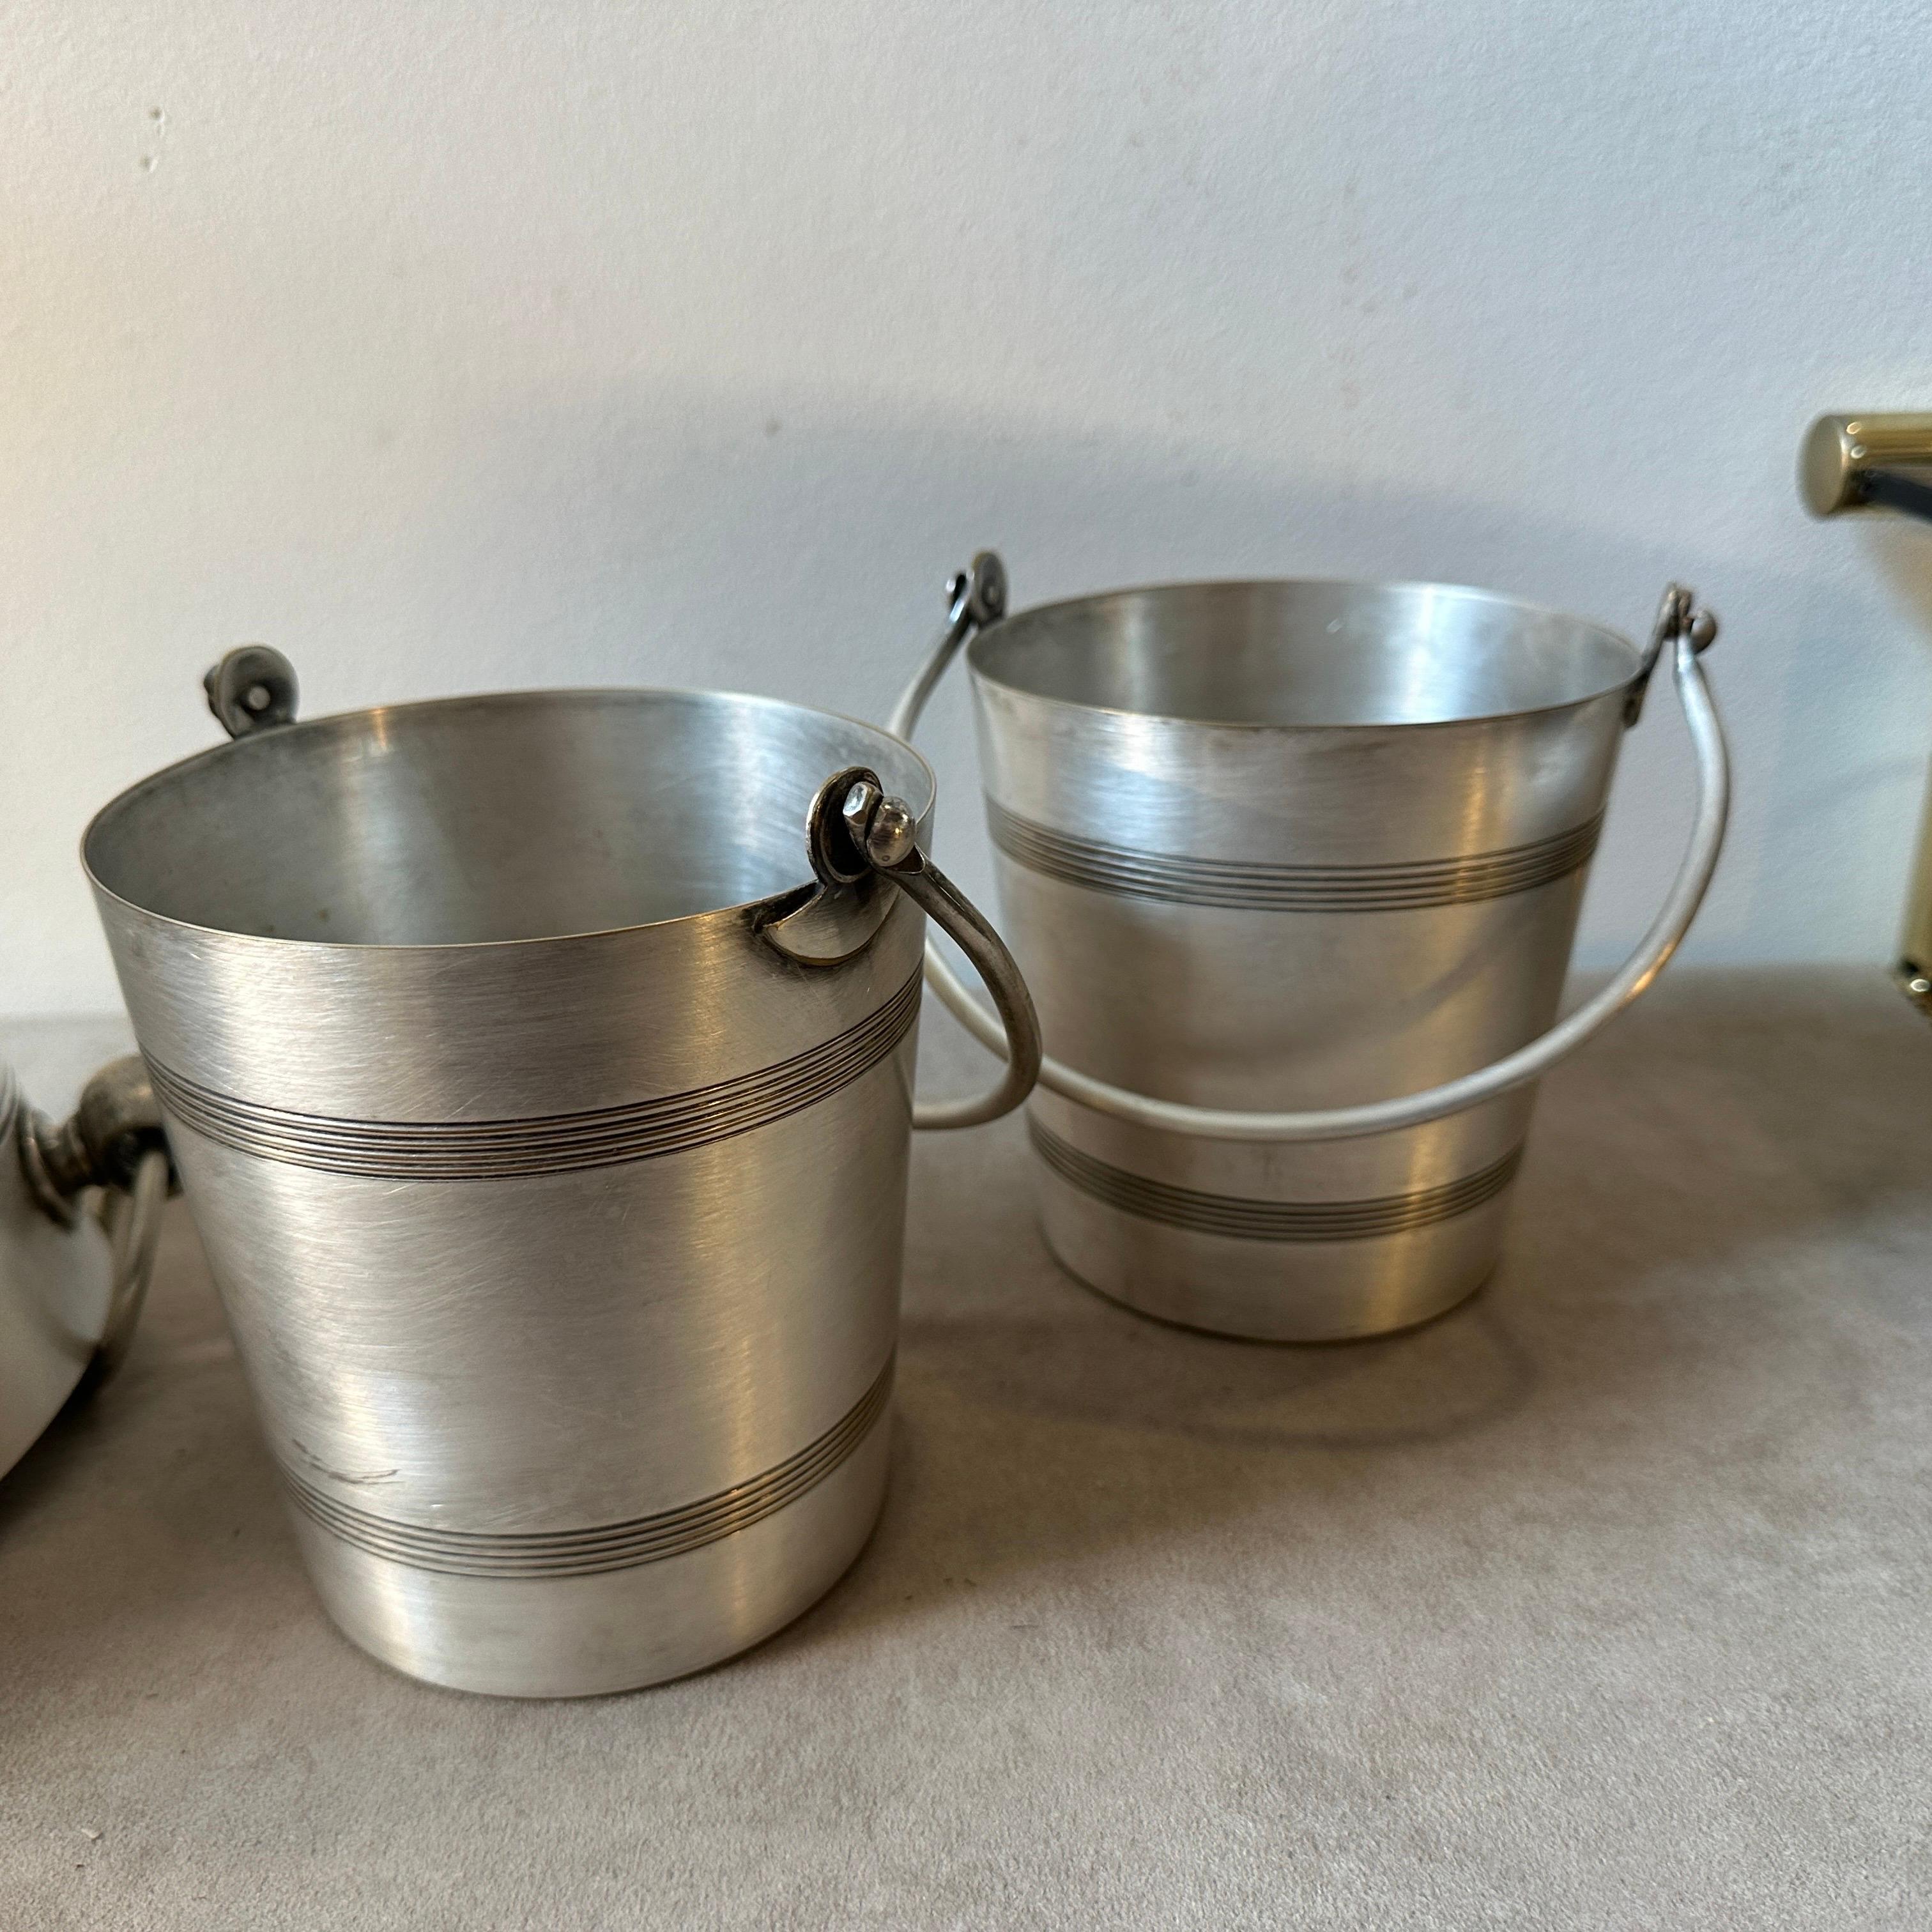 Silver Plate 1930s Art Deco Aluminum French Wine Cooler and Two Ice Bucket by Reneka For Sale